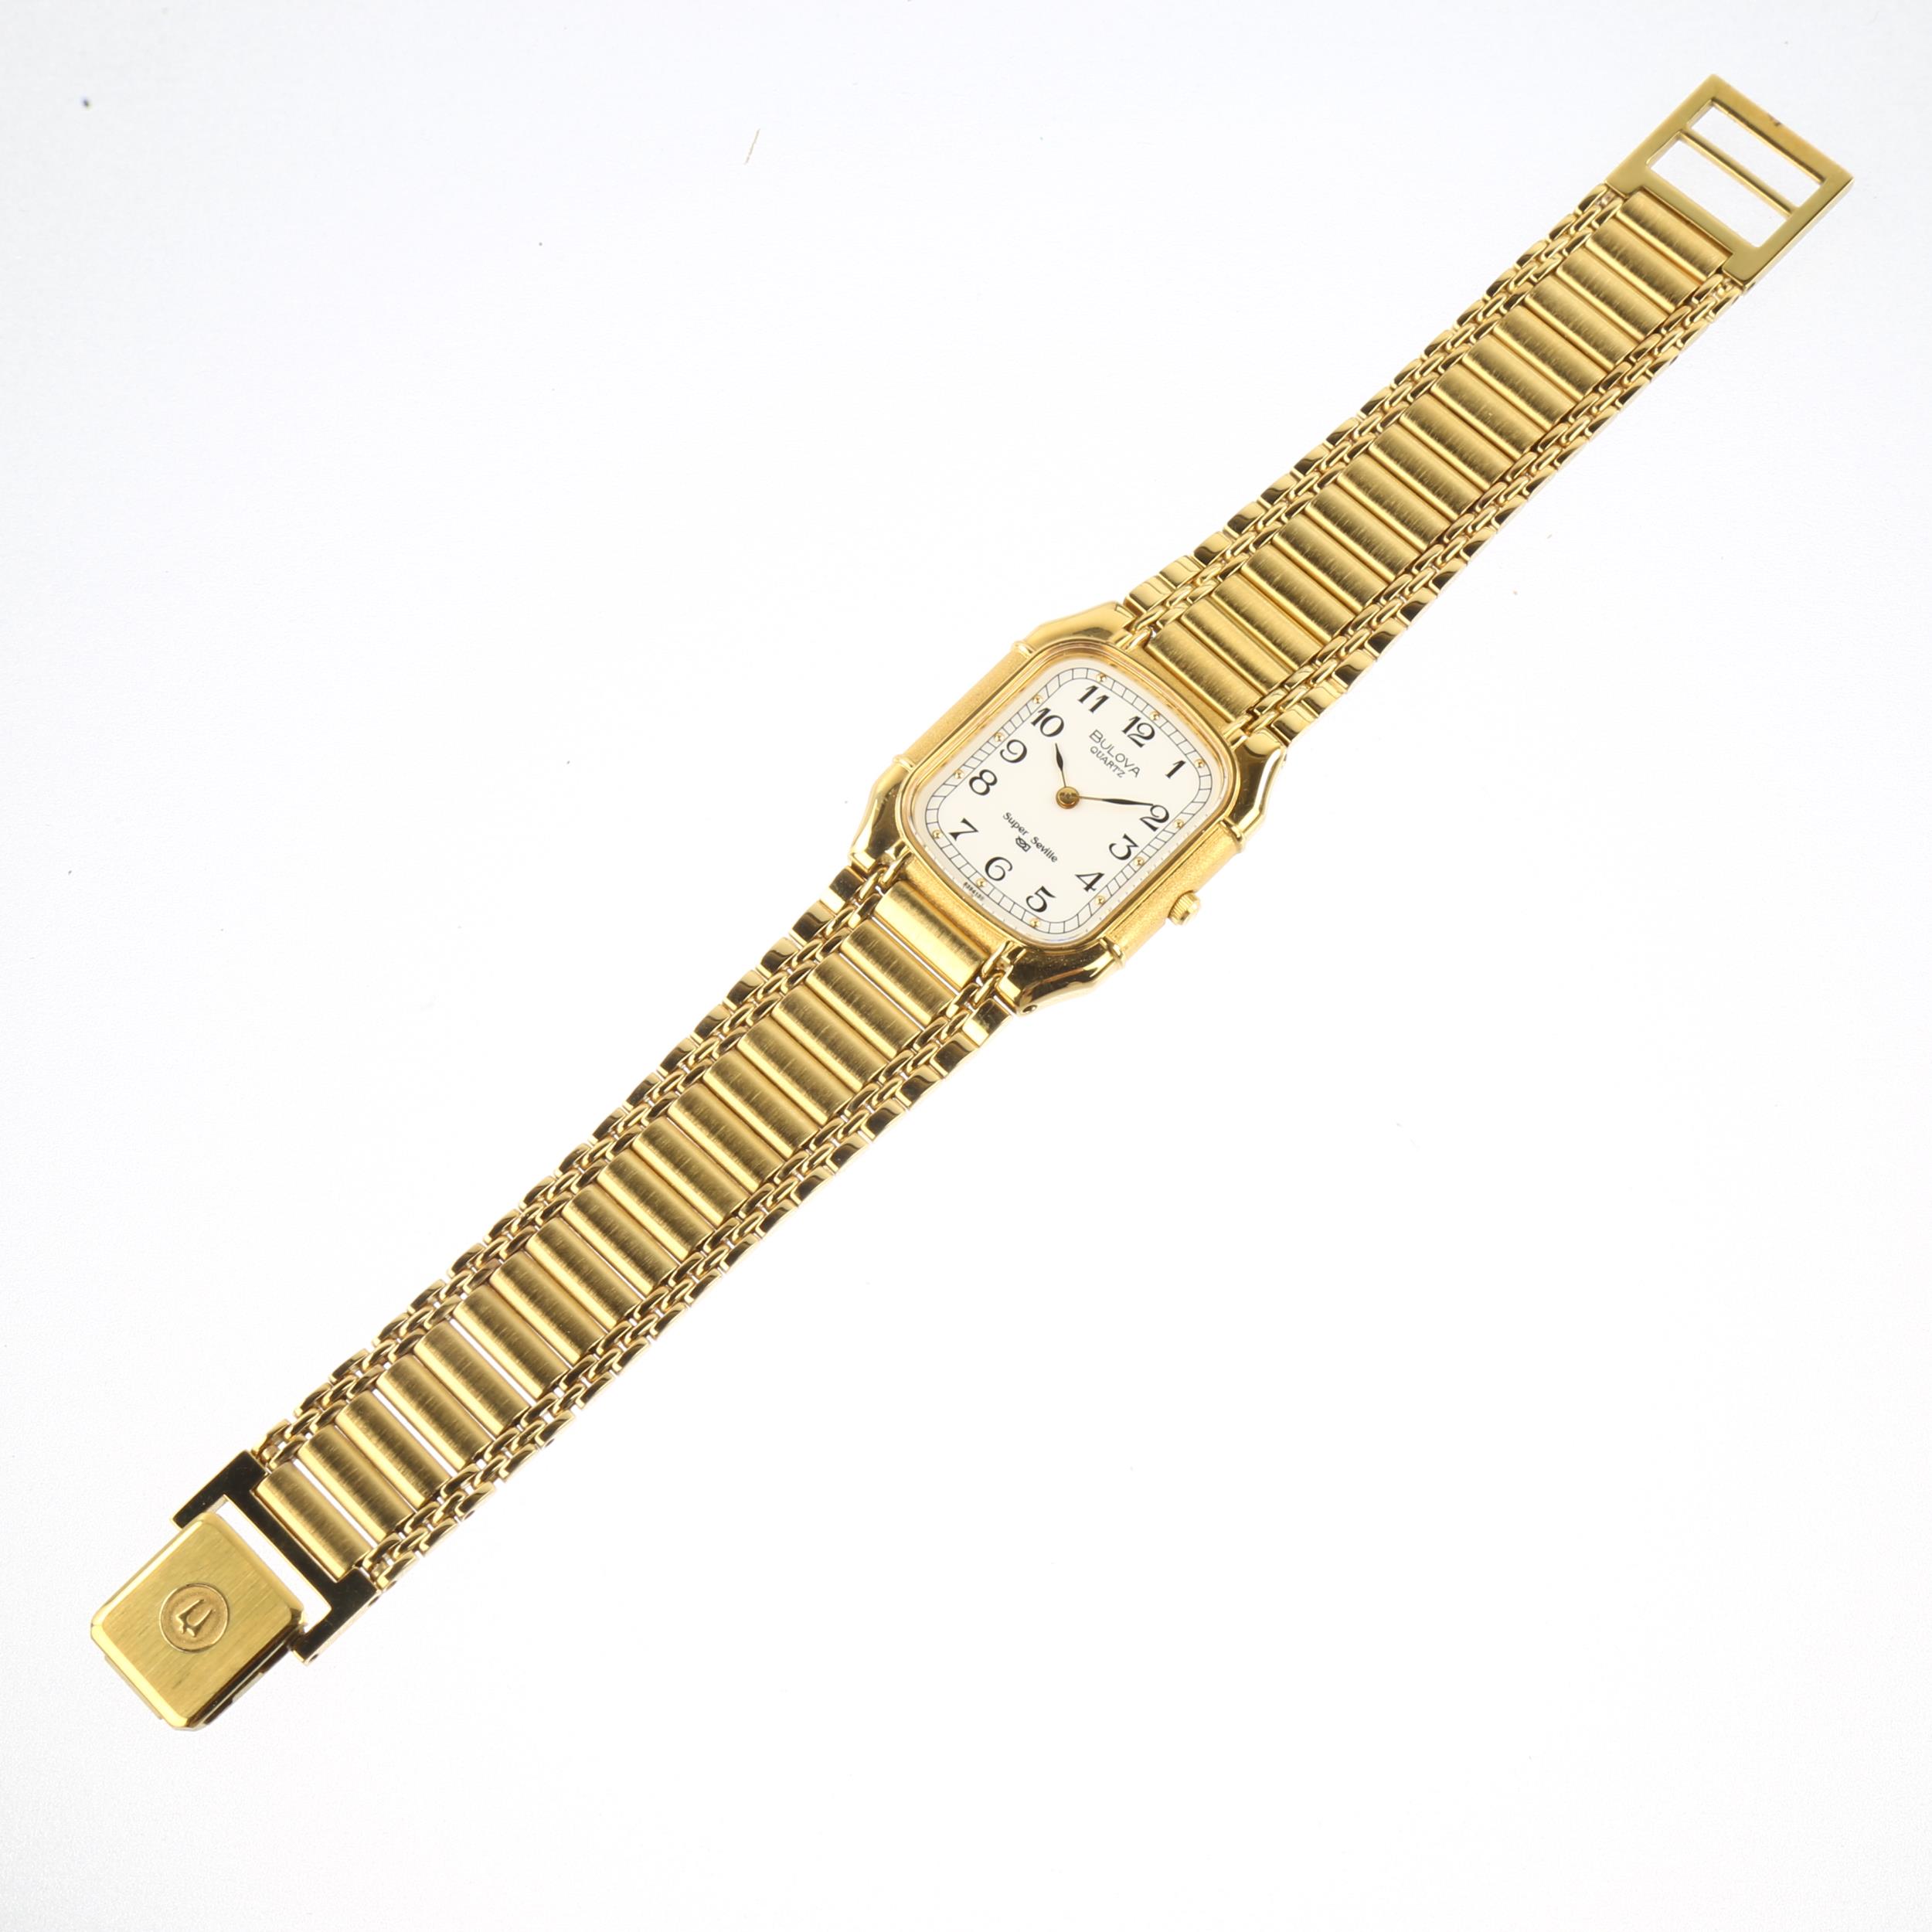 BULOVA - a gold plated stainless steel Super Seville quartz bracelet watch, white dial with Arabic - Image 2 of 5